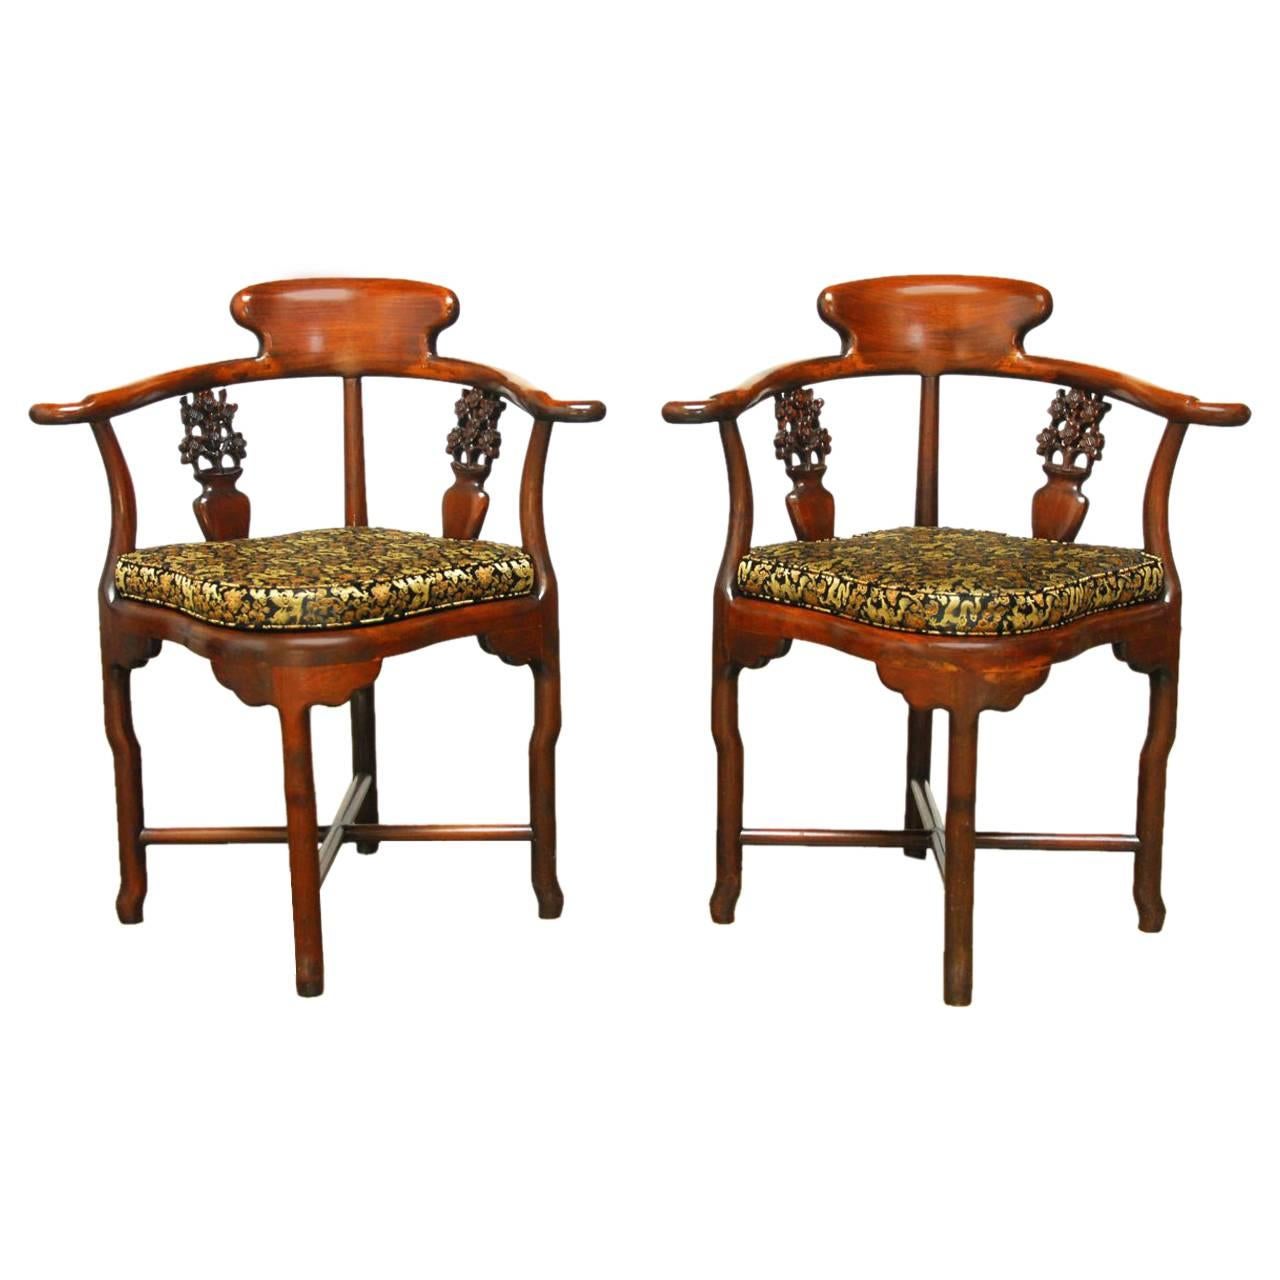 Pair of Exceptional Chinese Rosewood Corner Chairs